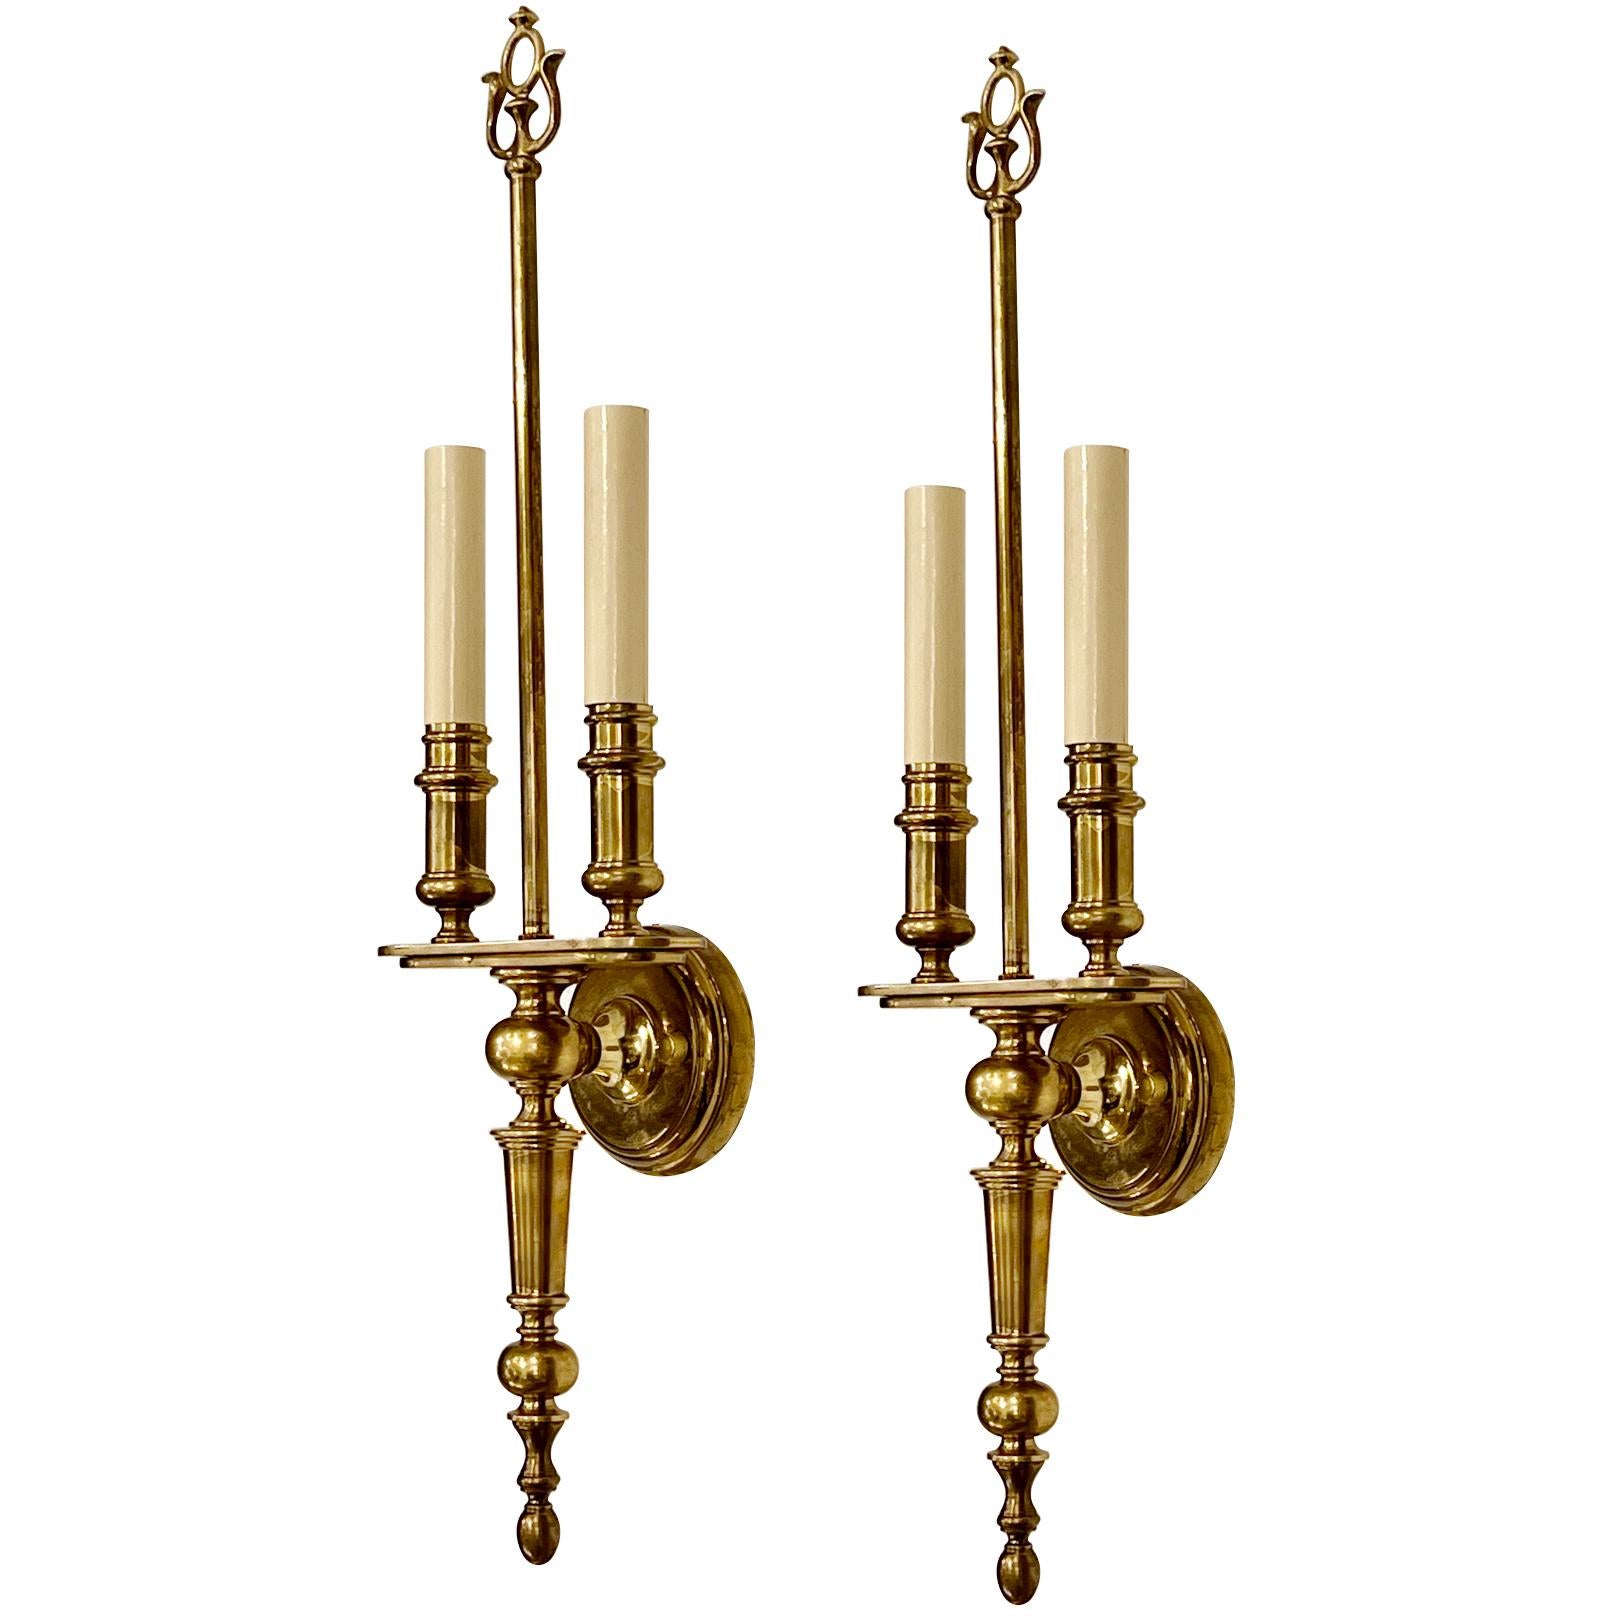 Set of eight circa 1940's French patinated bronze two-arm sconces. Sold in pairs.

Measurements:
Height: 22